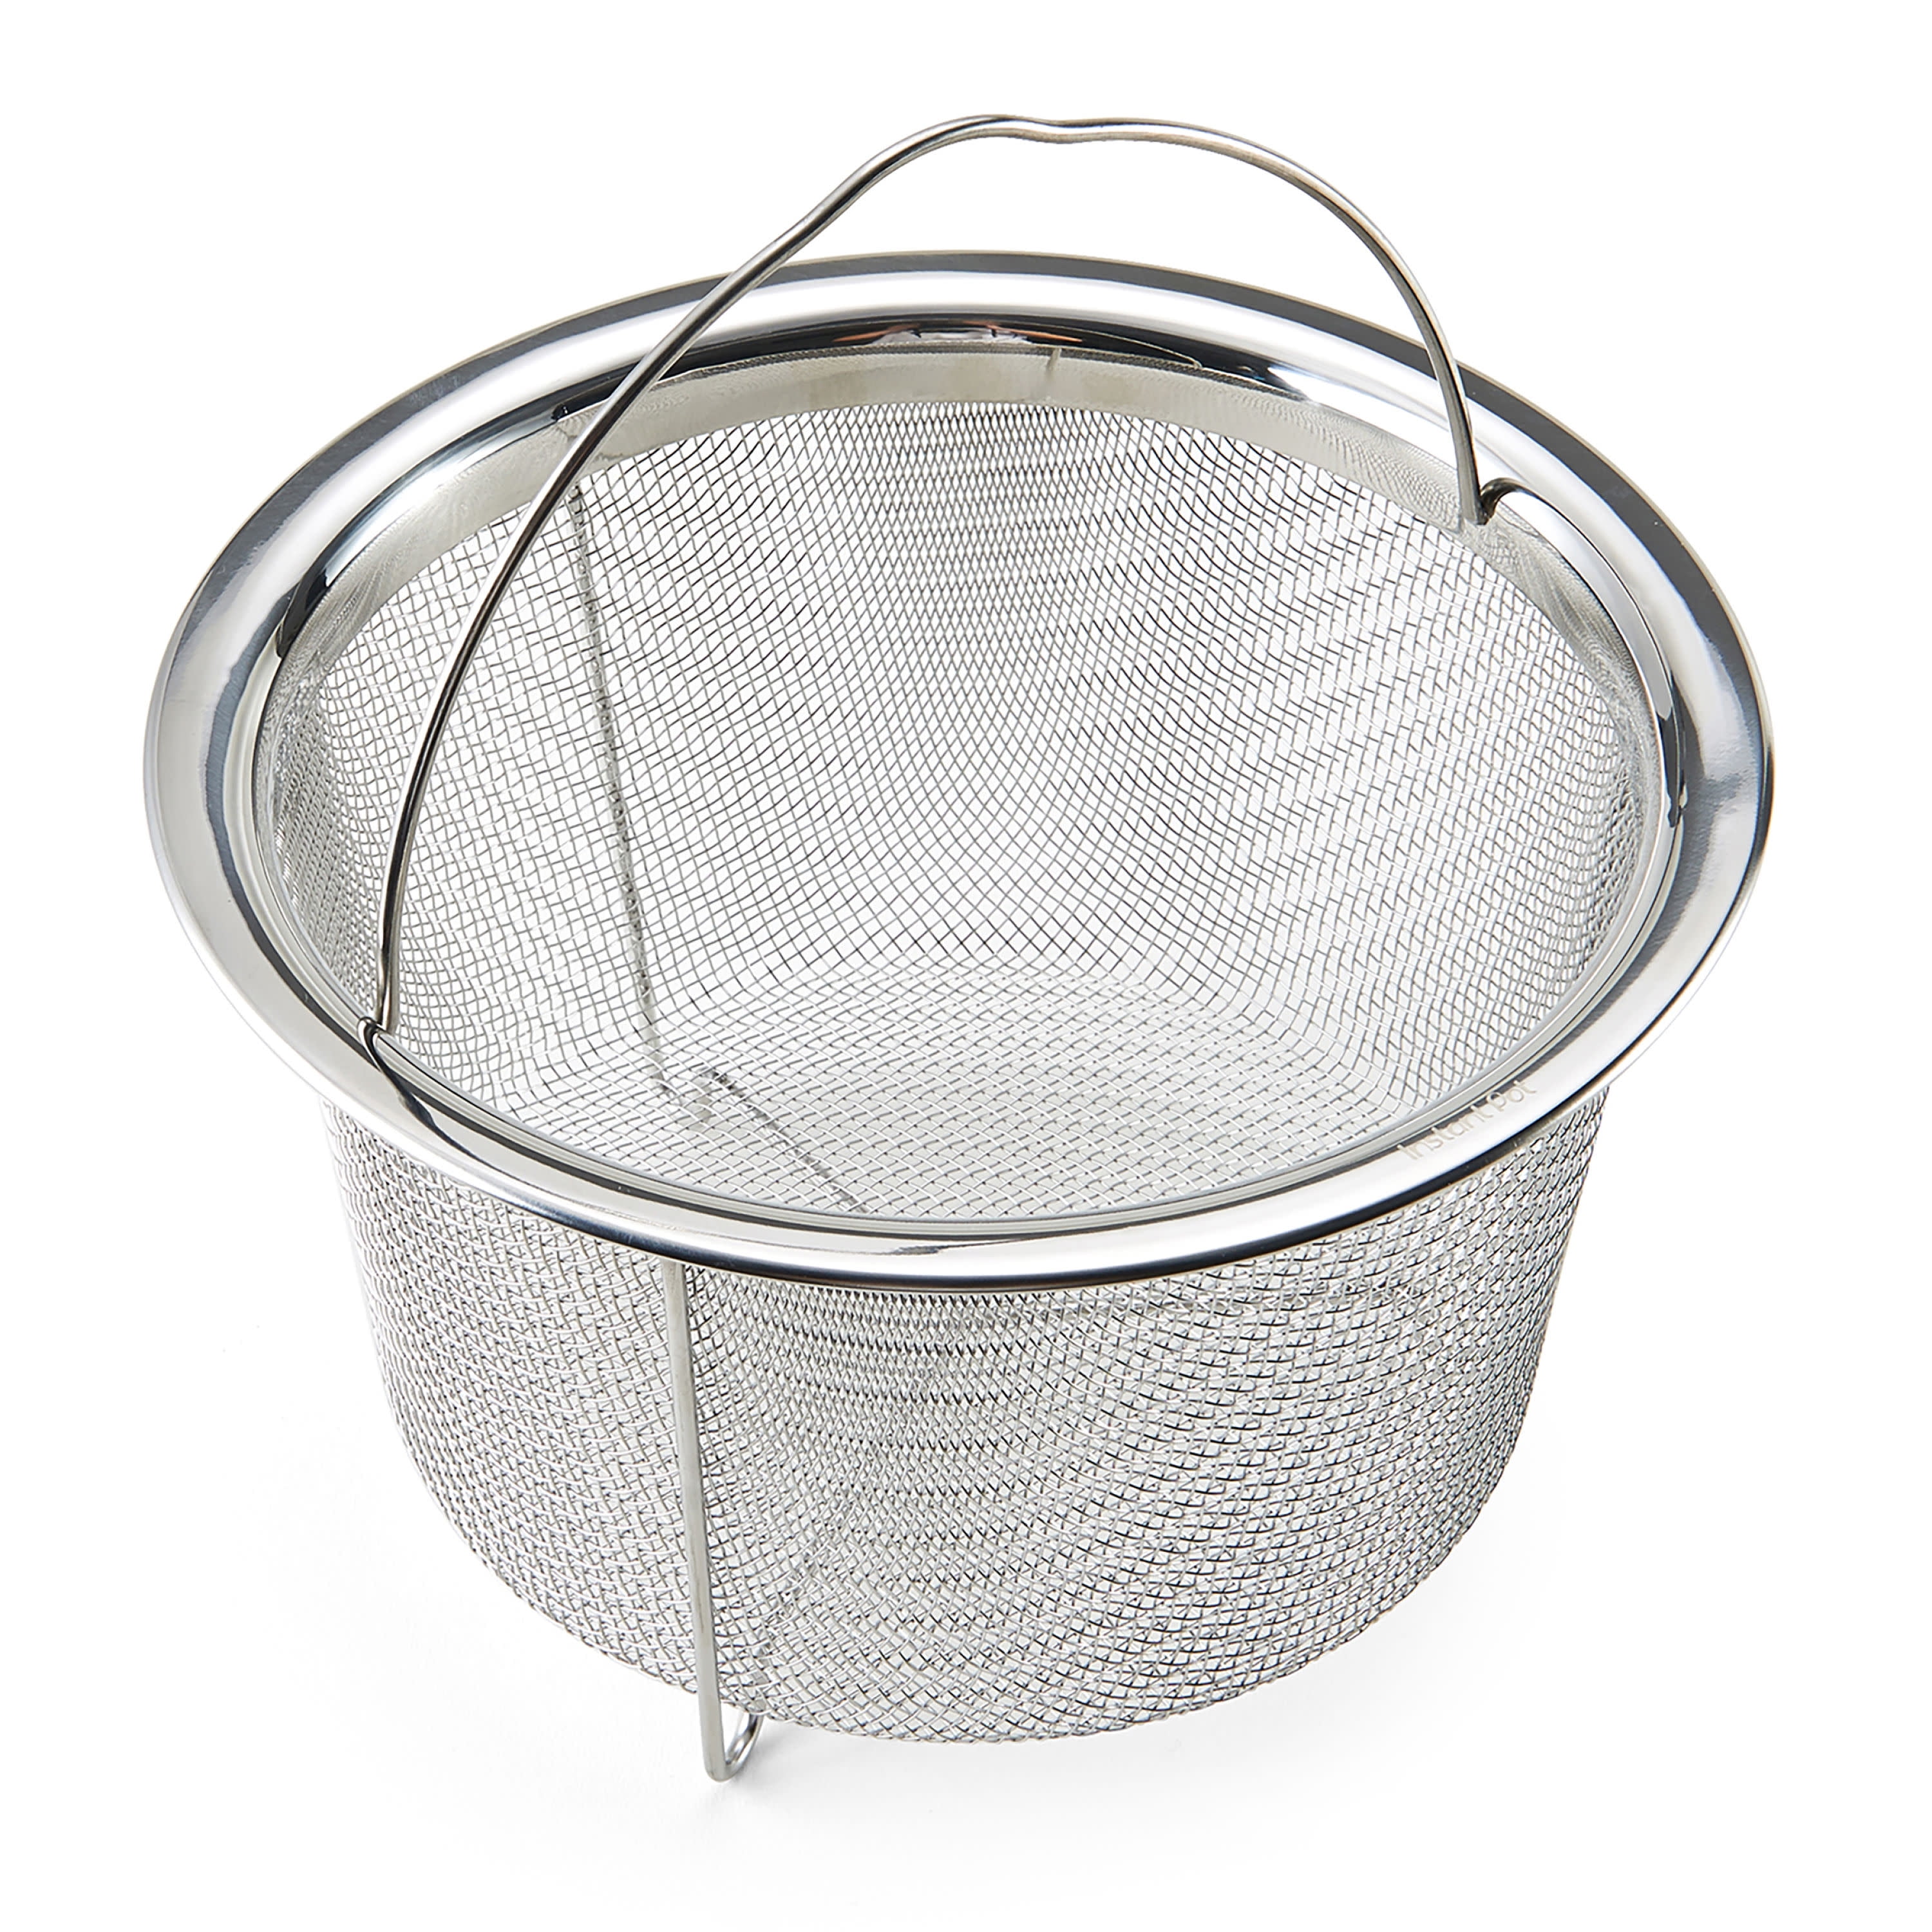 Dropship New Home Stainless Steel Steamer Basket For Instant Pot W